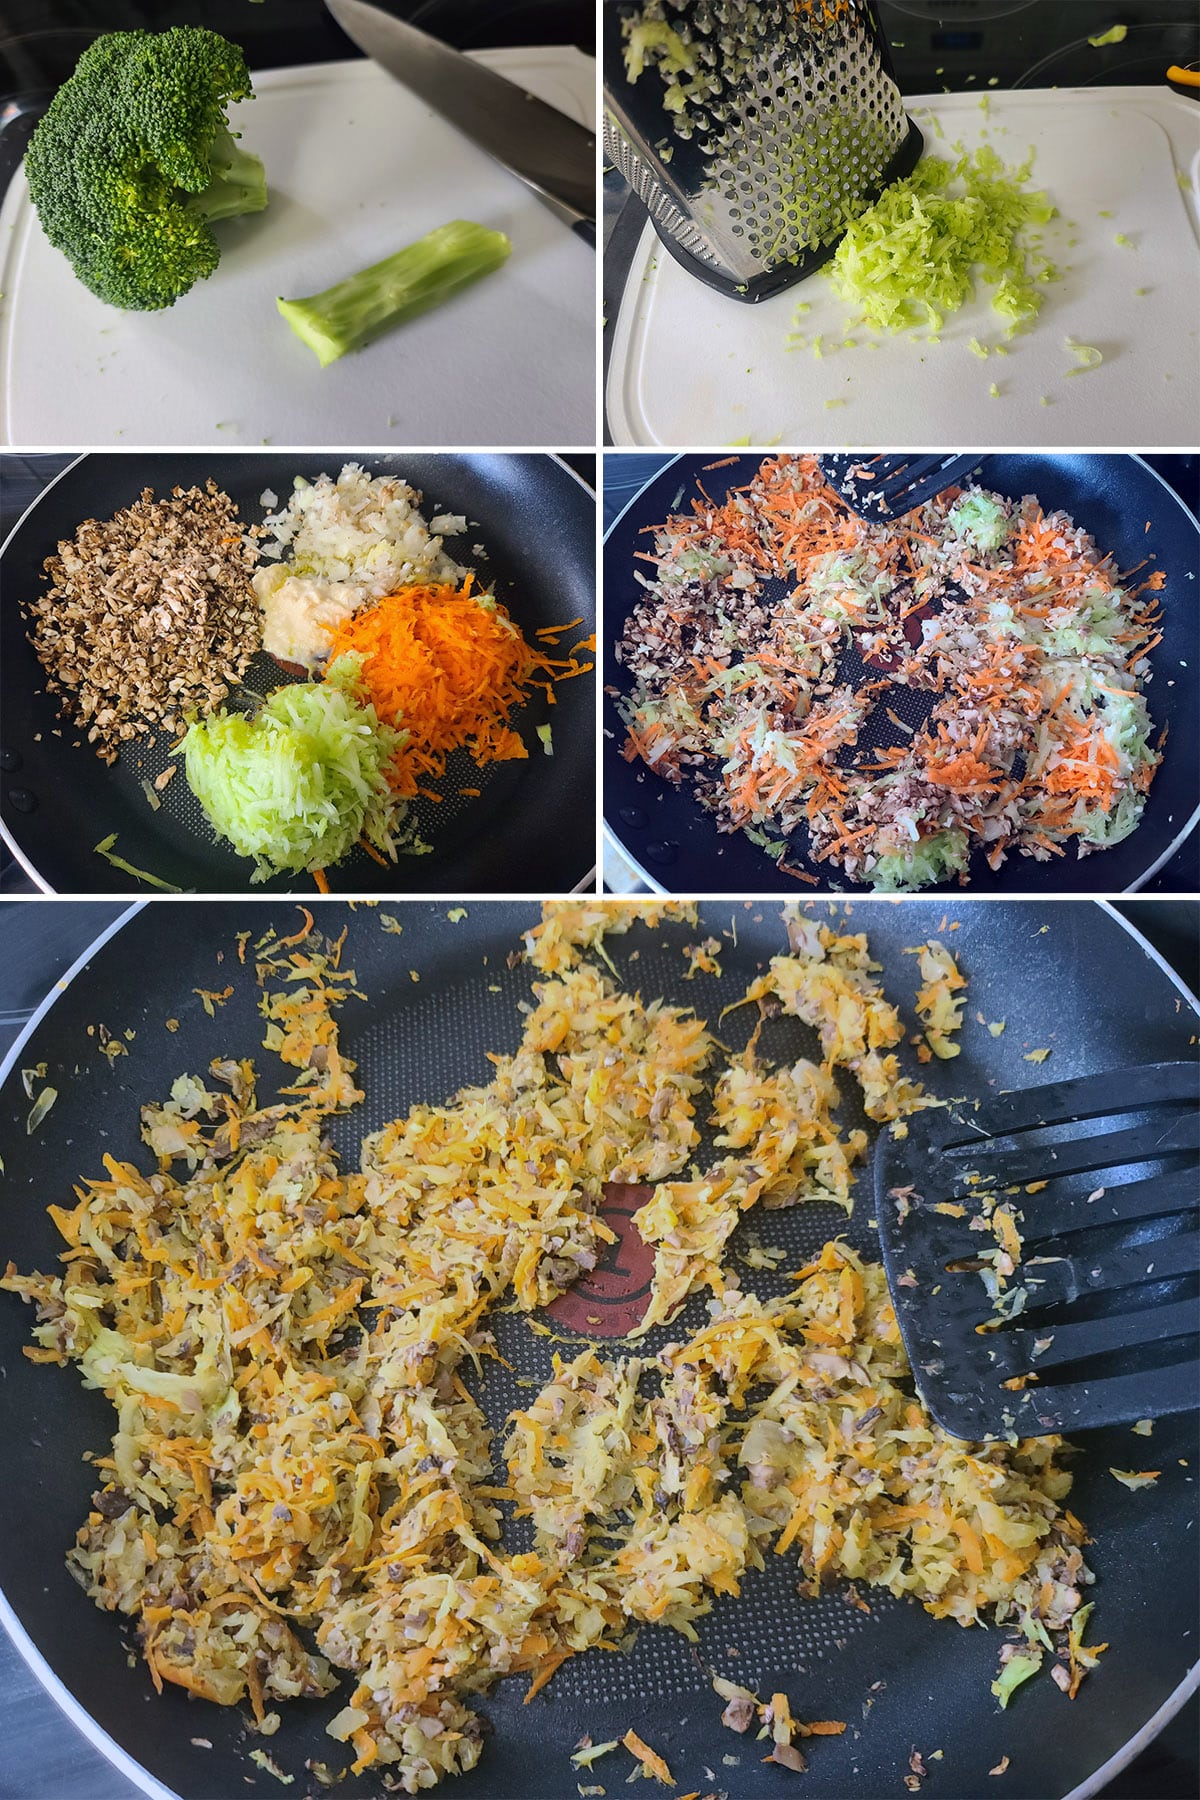 A 5 part image showing the veggies being prepared and cooked.